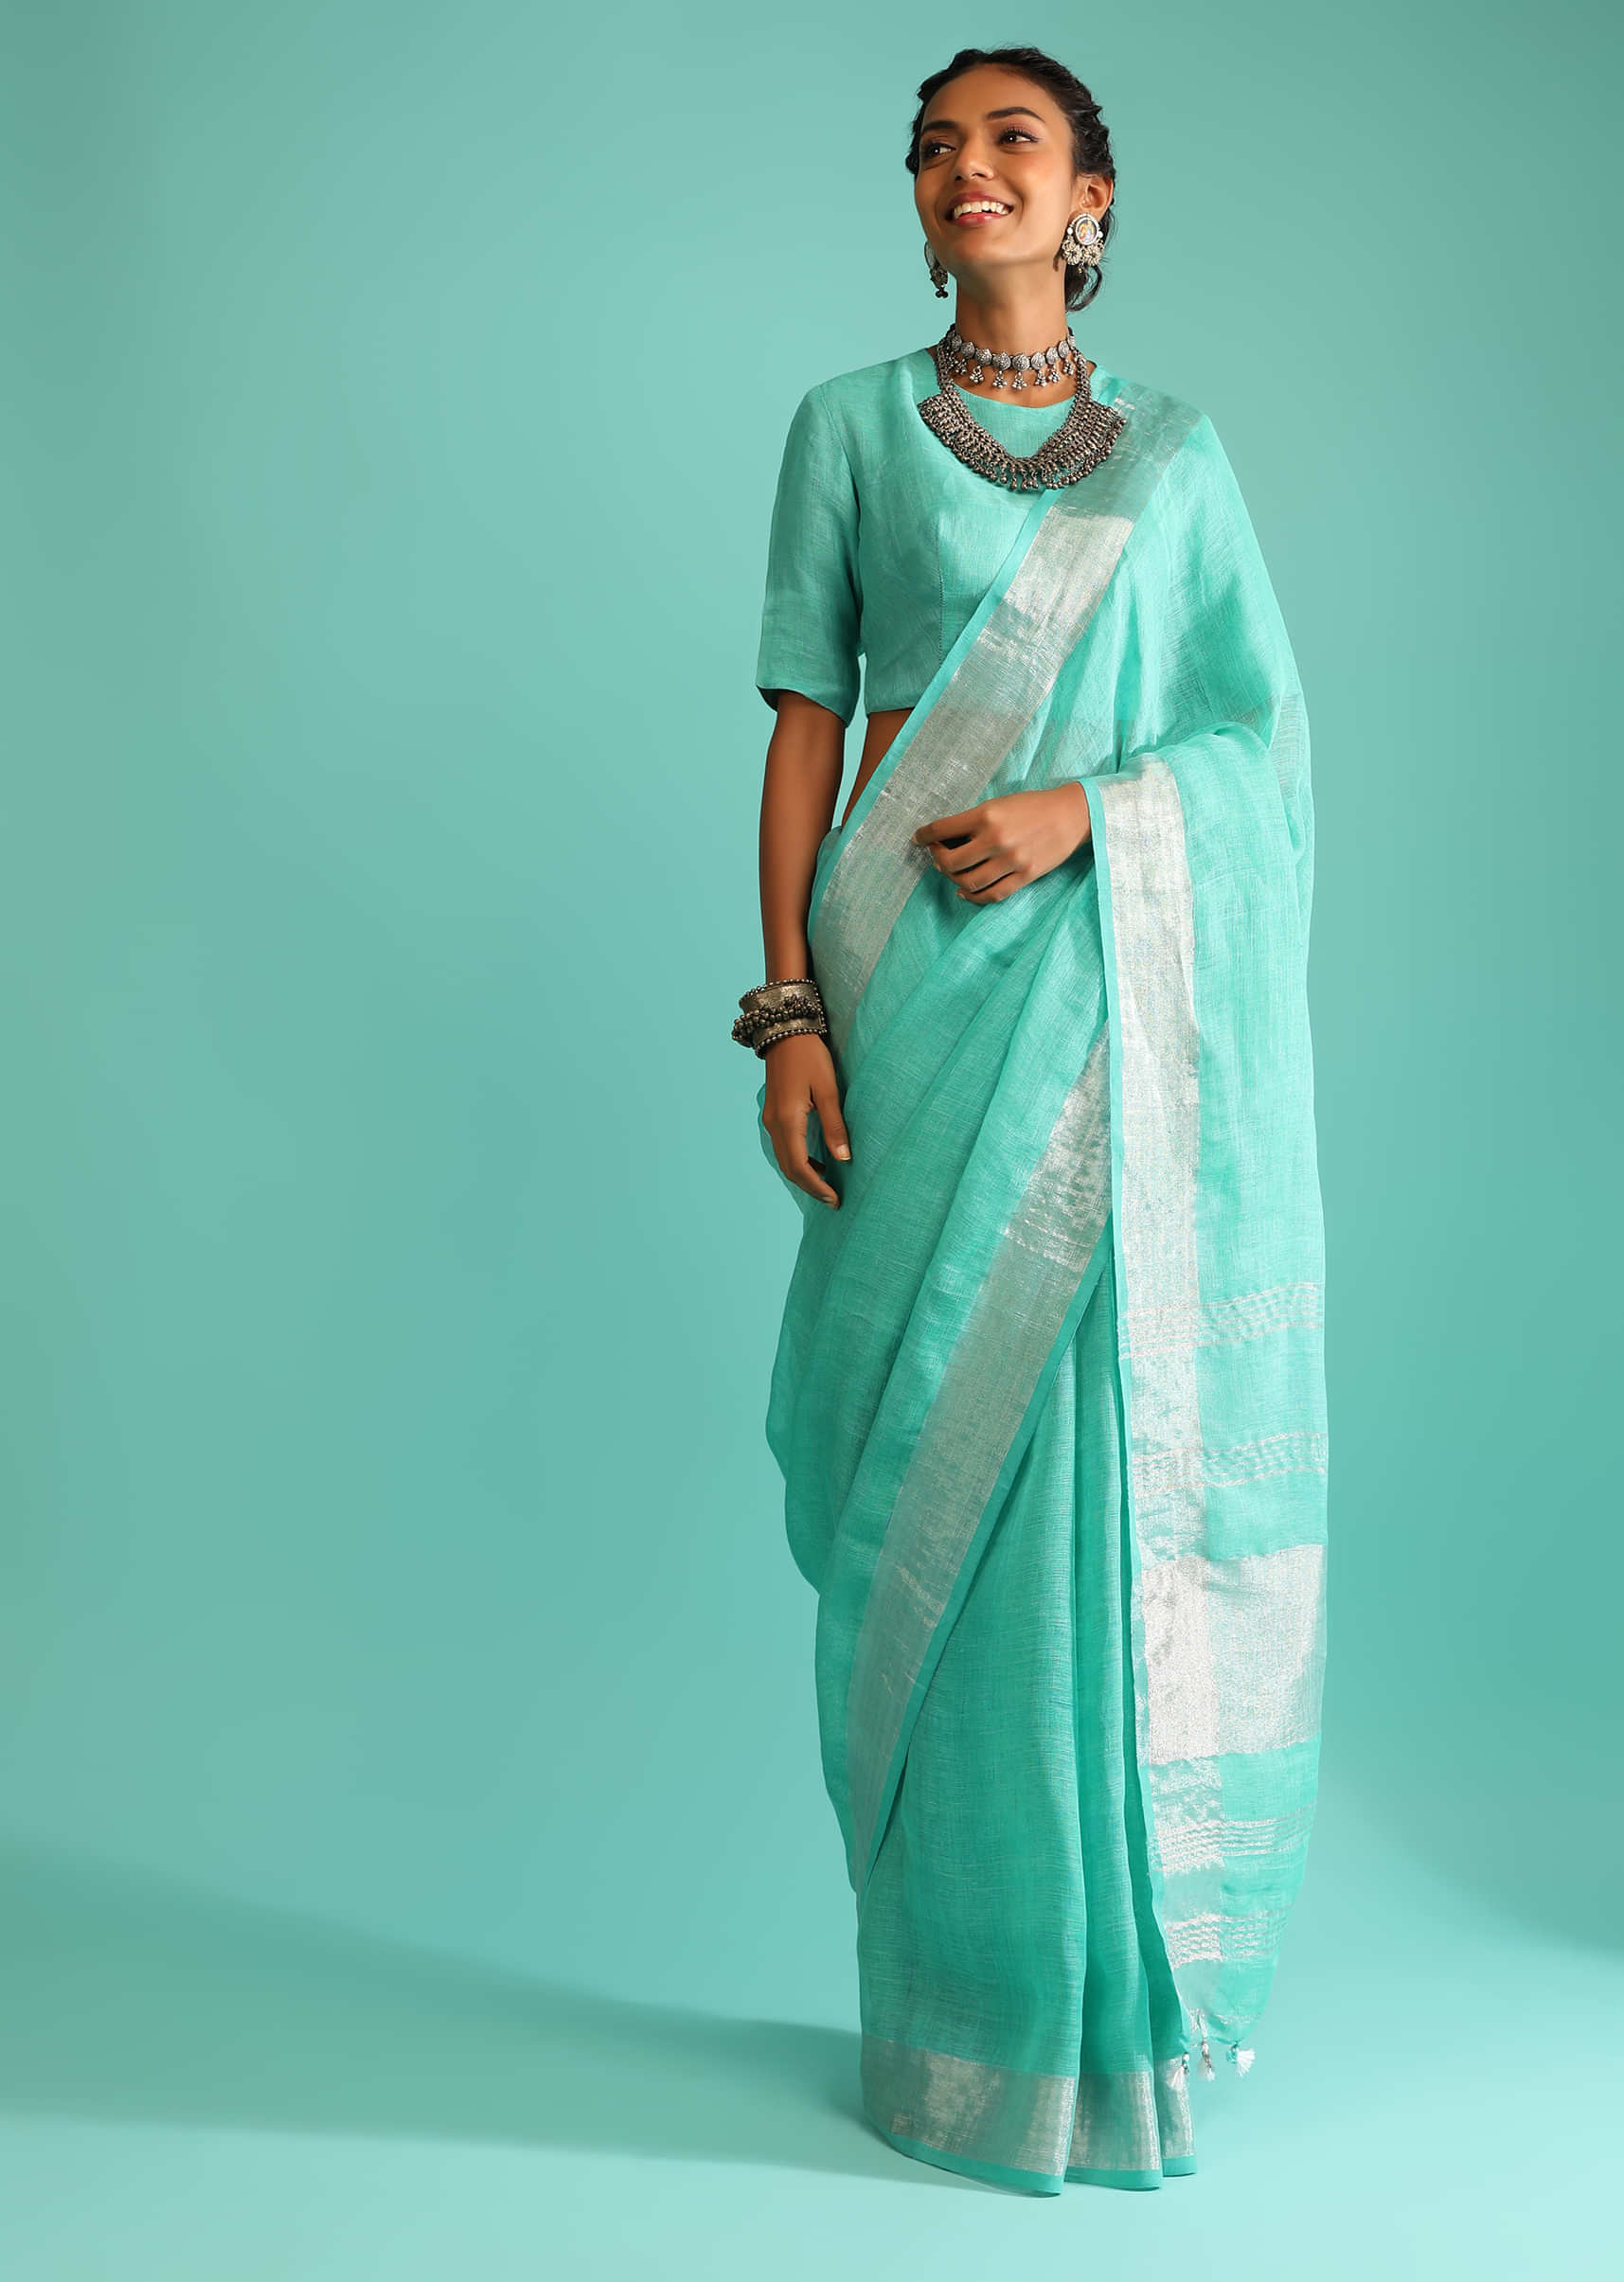 Aqua Green Saree In Linen With Silver Brocade Border And Striped Pallu Along With A Matching Unstitched Blouse  